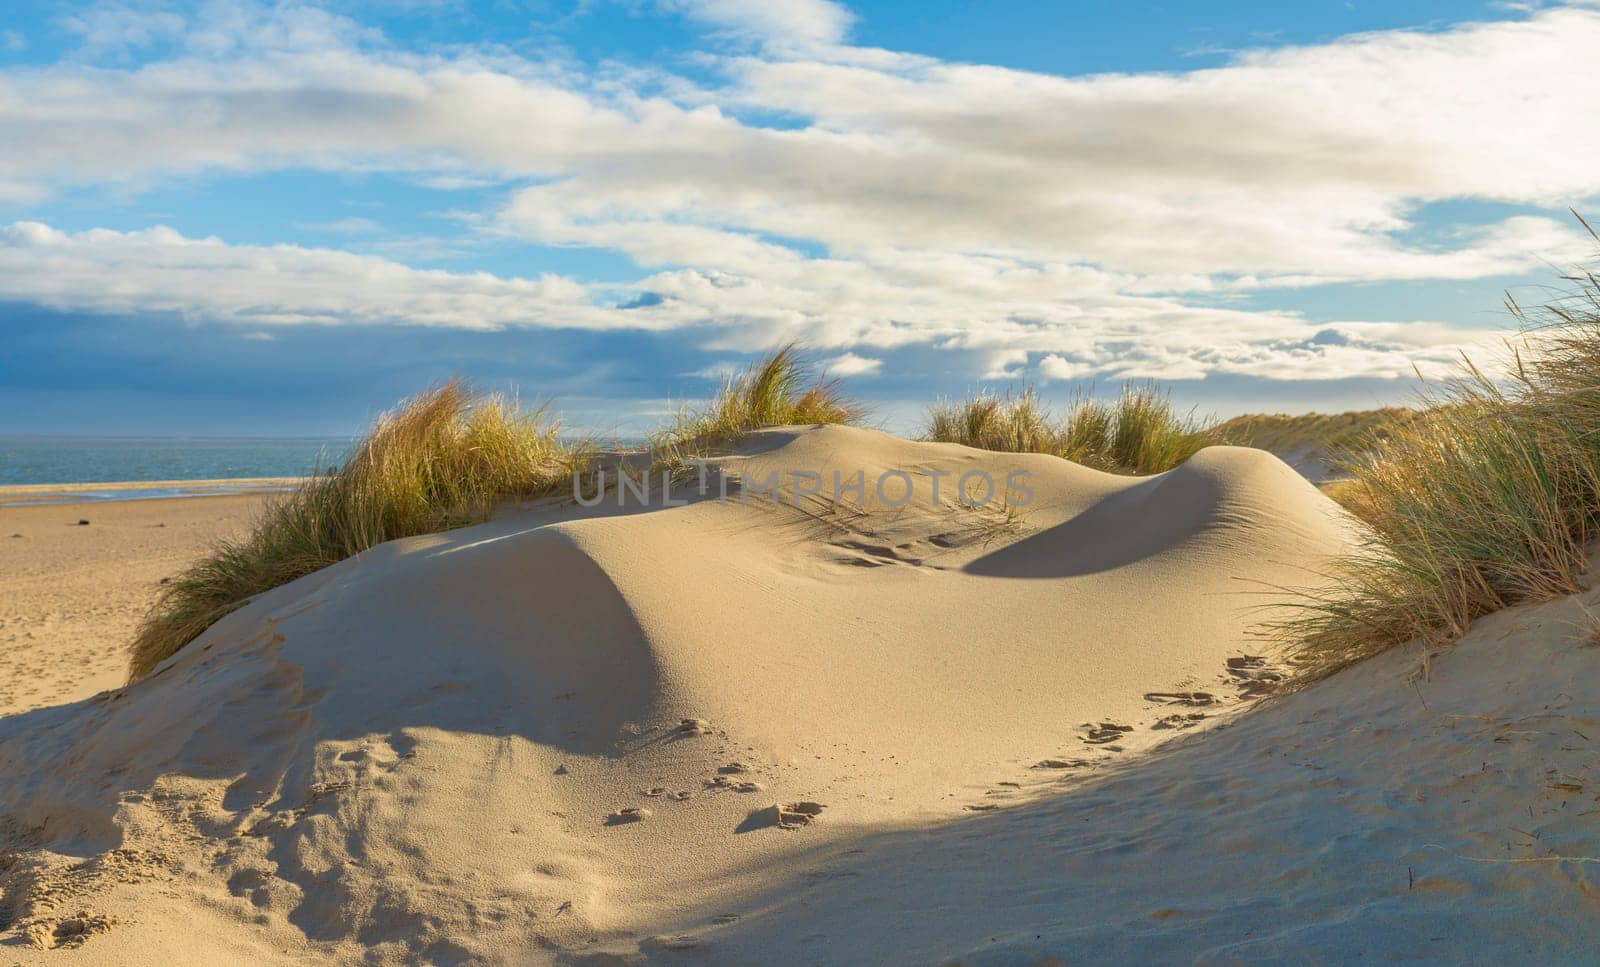 beautiful sand dunes formed by the wind on the beach of the Wadden Island of Texel with the sea and clouds in the background by compuinfoto